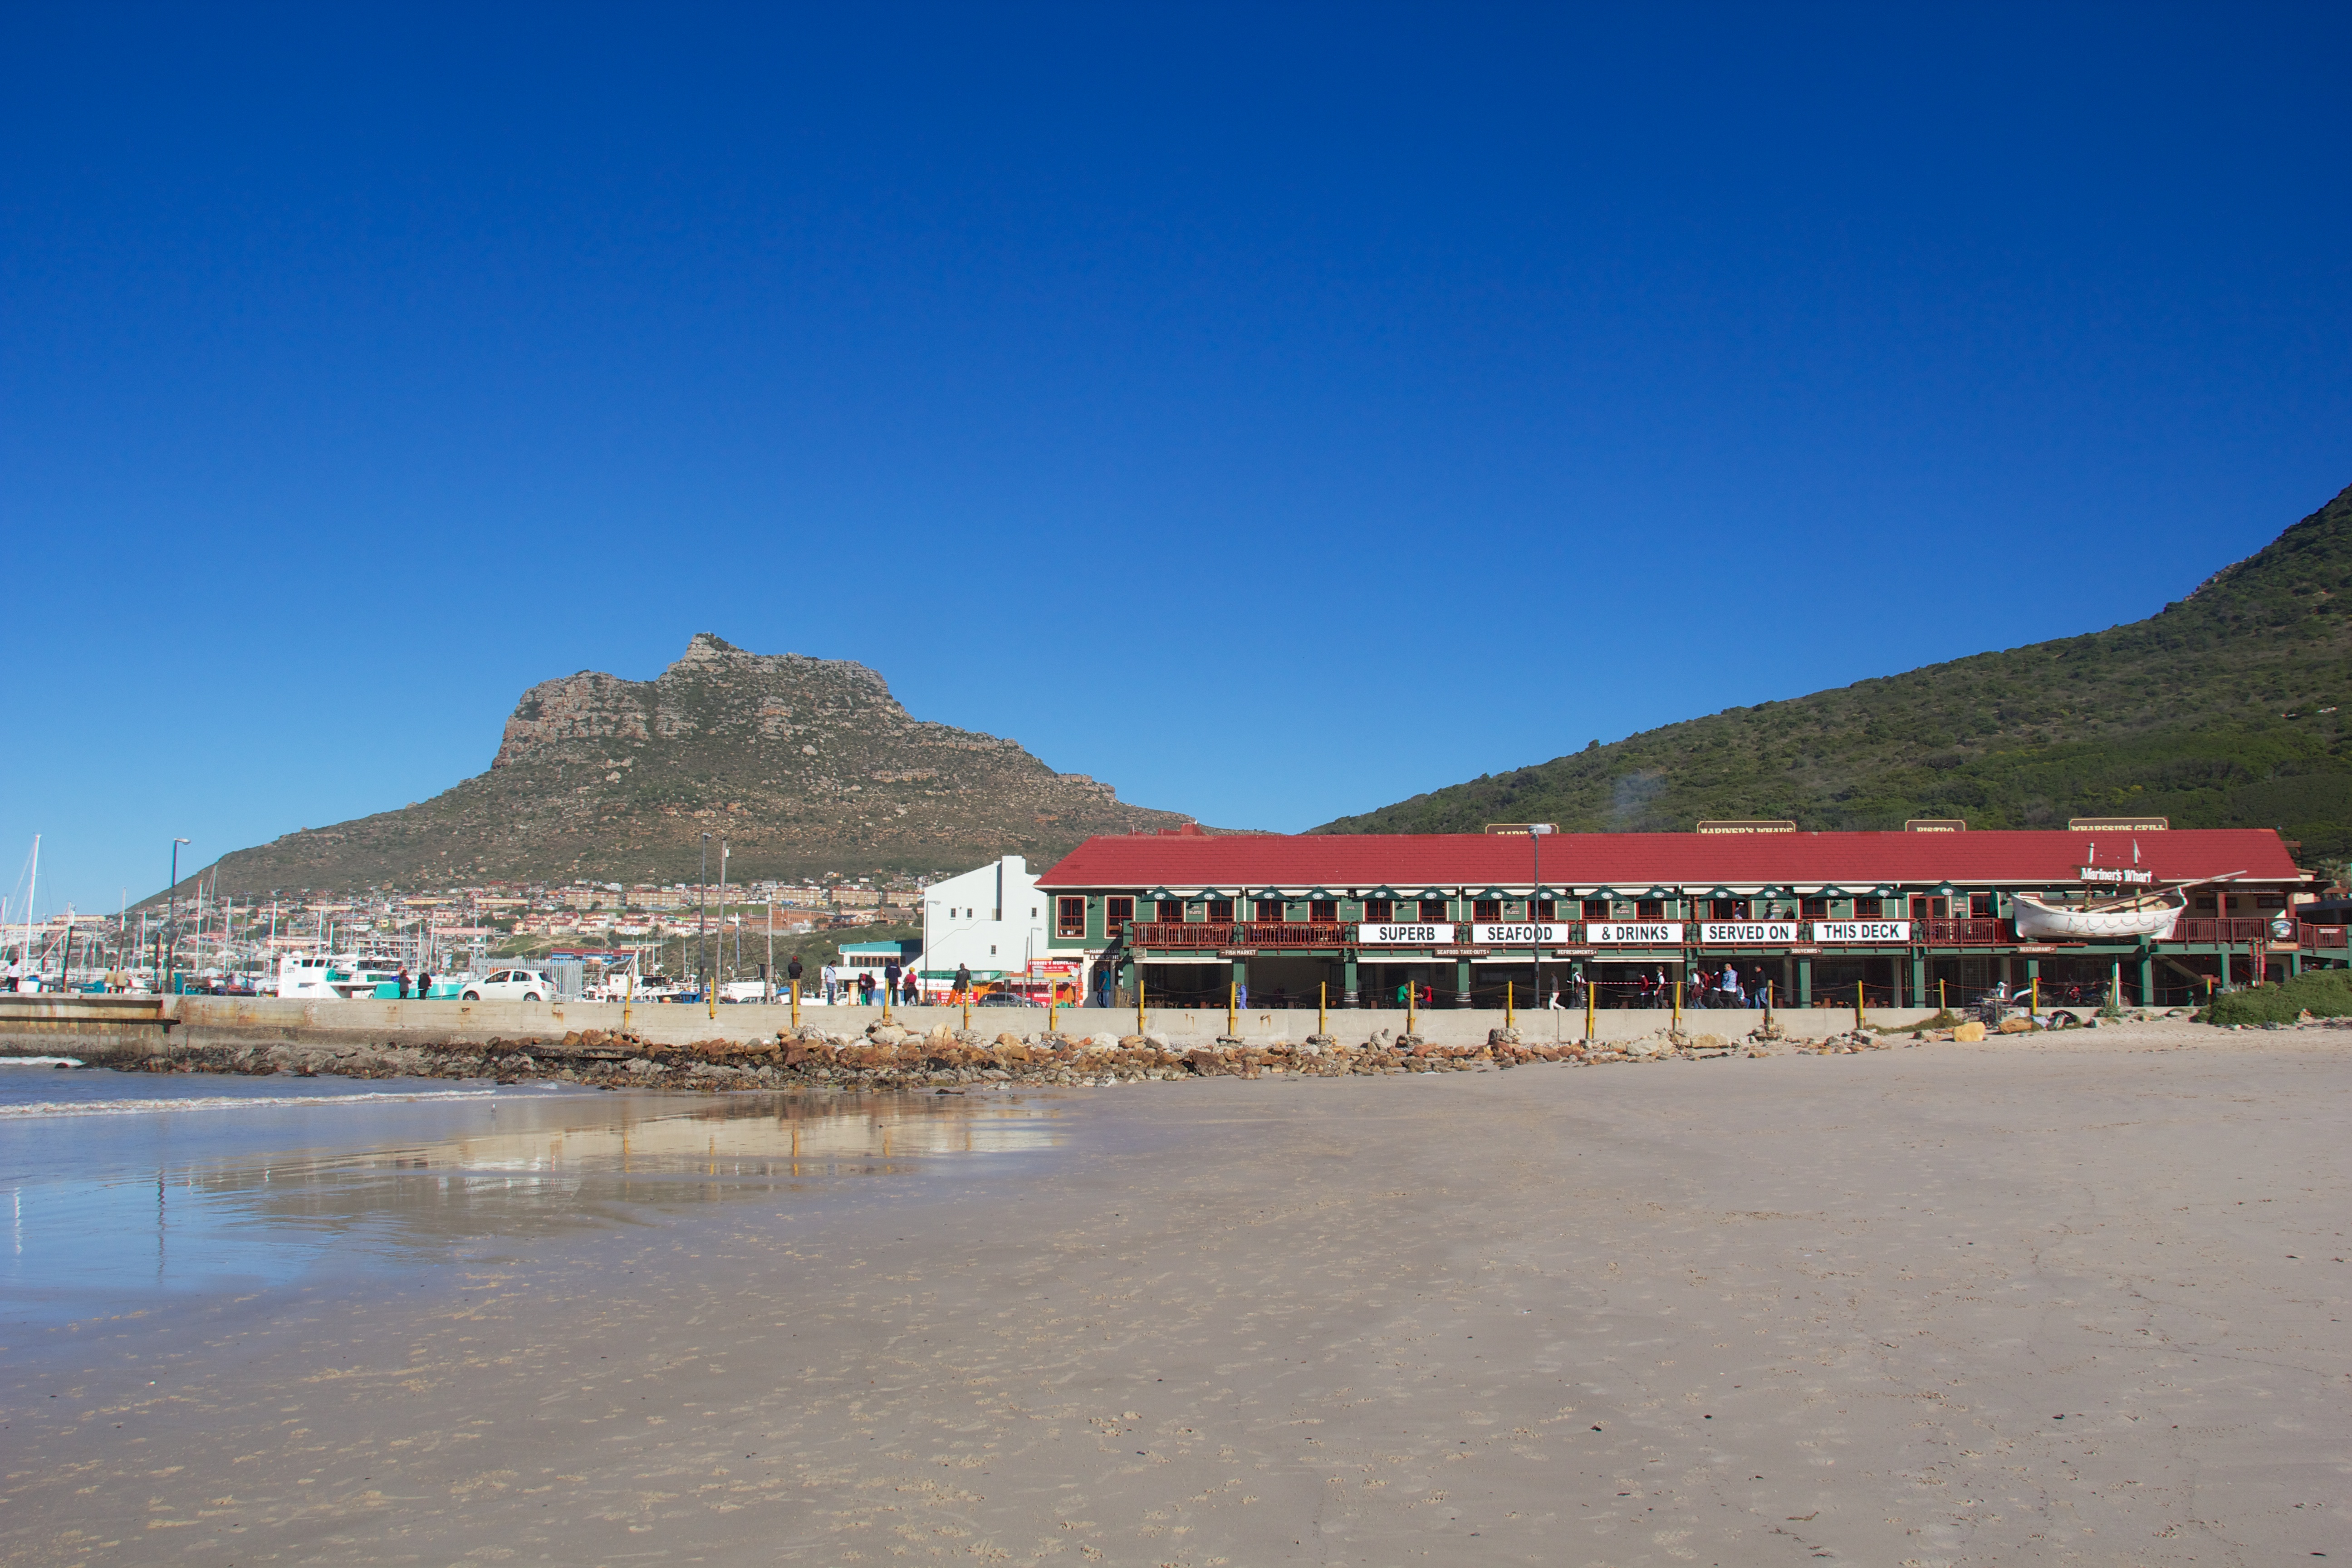 Fish Market Houtbay Pictures - Mariners Wharf Seafood Restaurant Hout Bay Stock Photo Edit Now 699933529